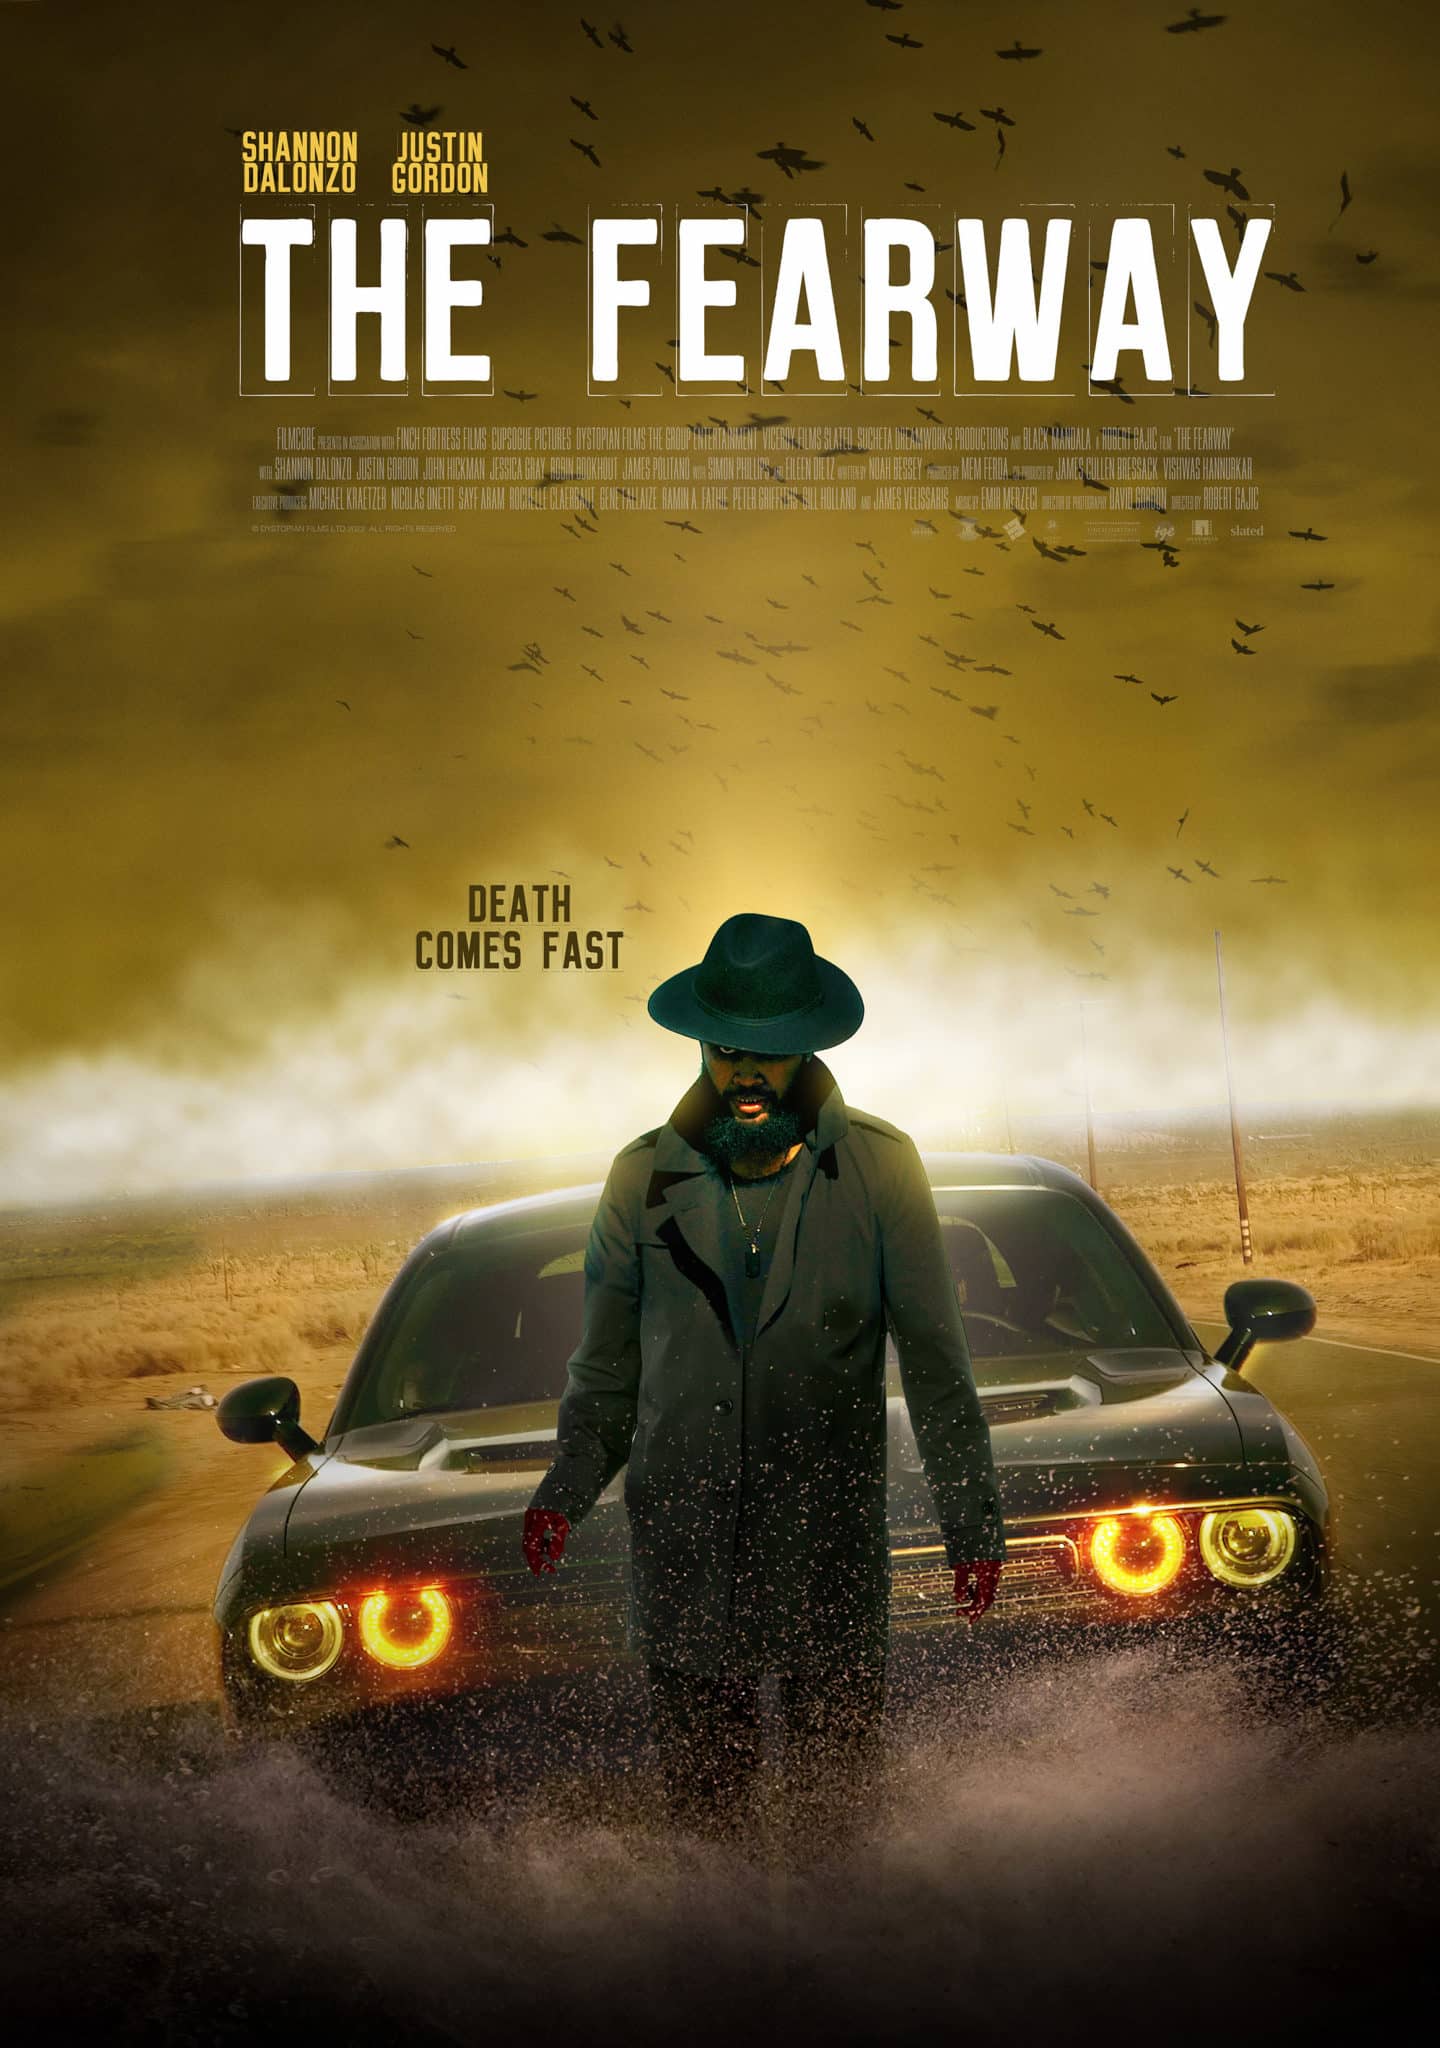 The Fearway – Teaser Poster